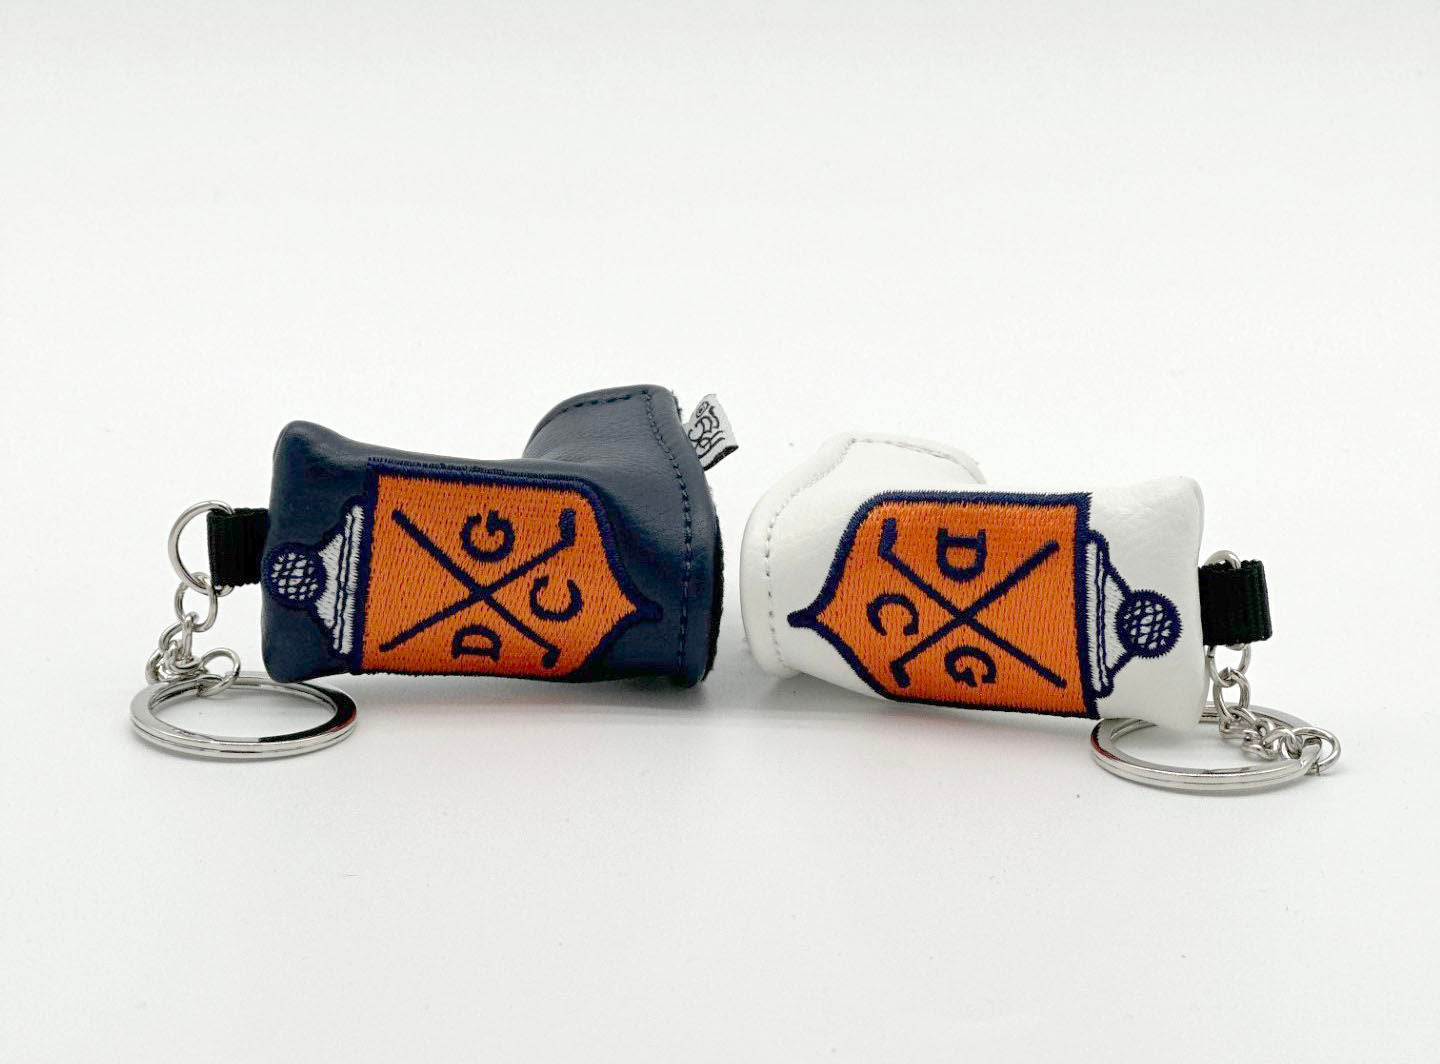 PRG Putter Cover Key Chain